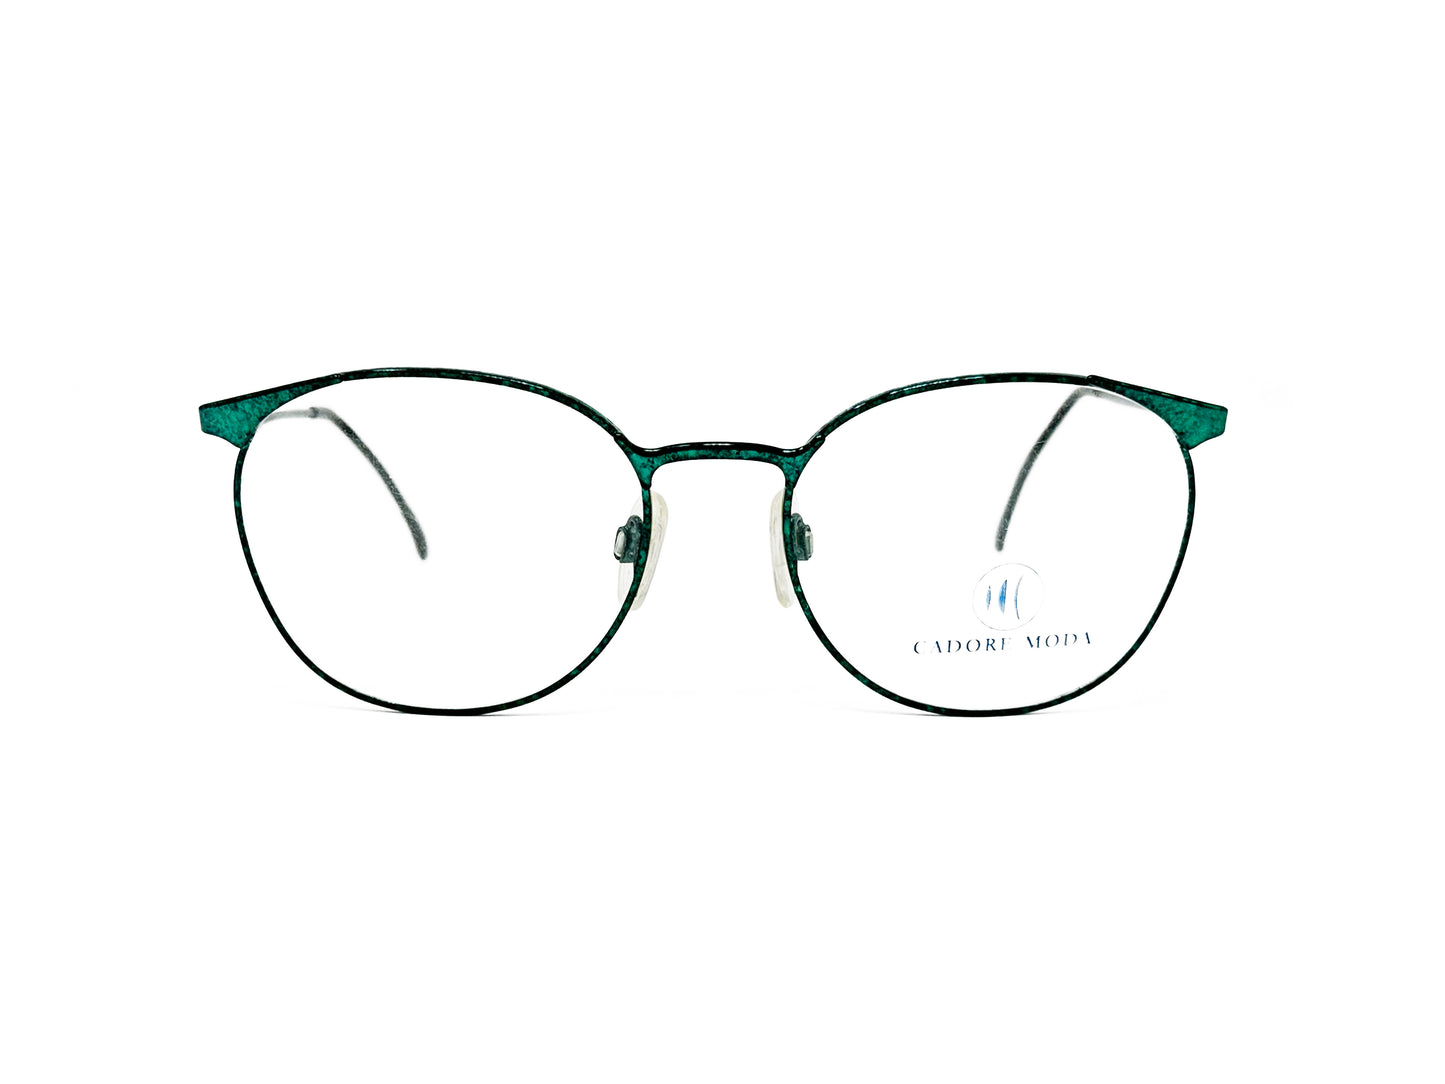 Cadore Moda round metal optical frame with wing tips. Model: Paris. Color: Demi Green. Front view. 